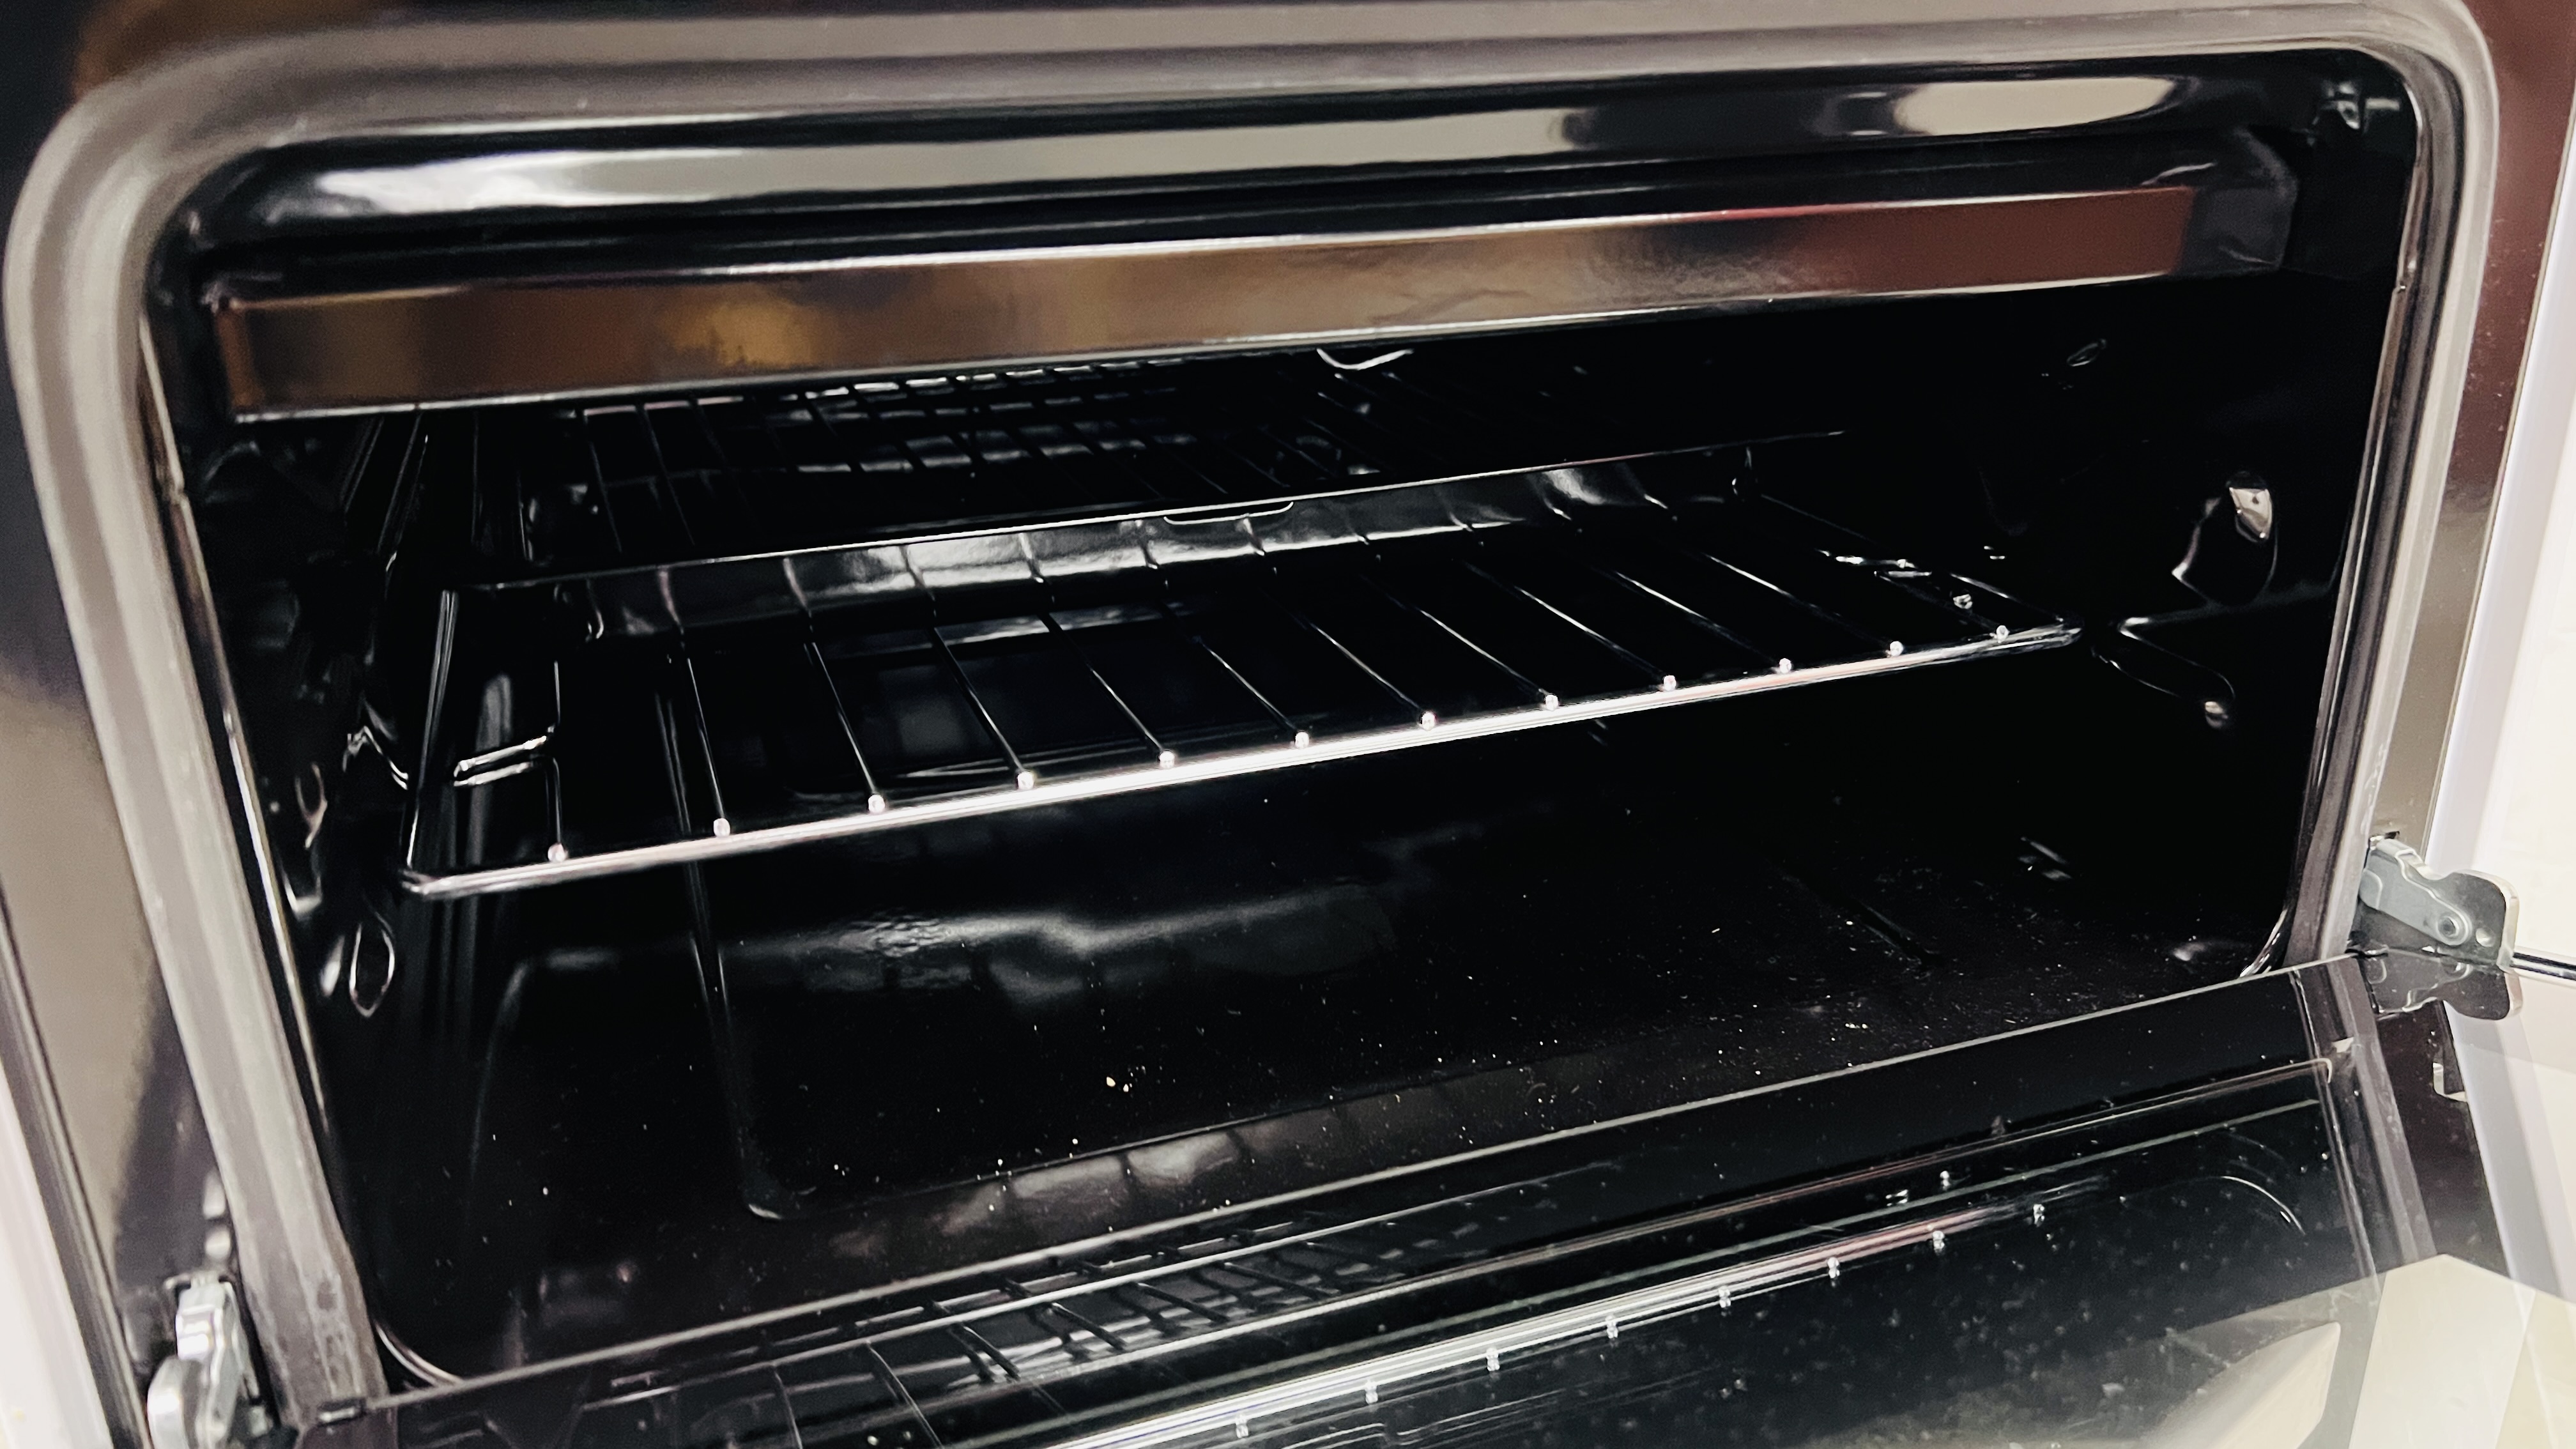 LOGIK ELECTRIC OVEN - SOLD AS SEEN. - Image 8 of 10